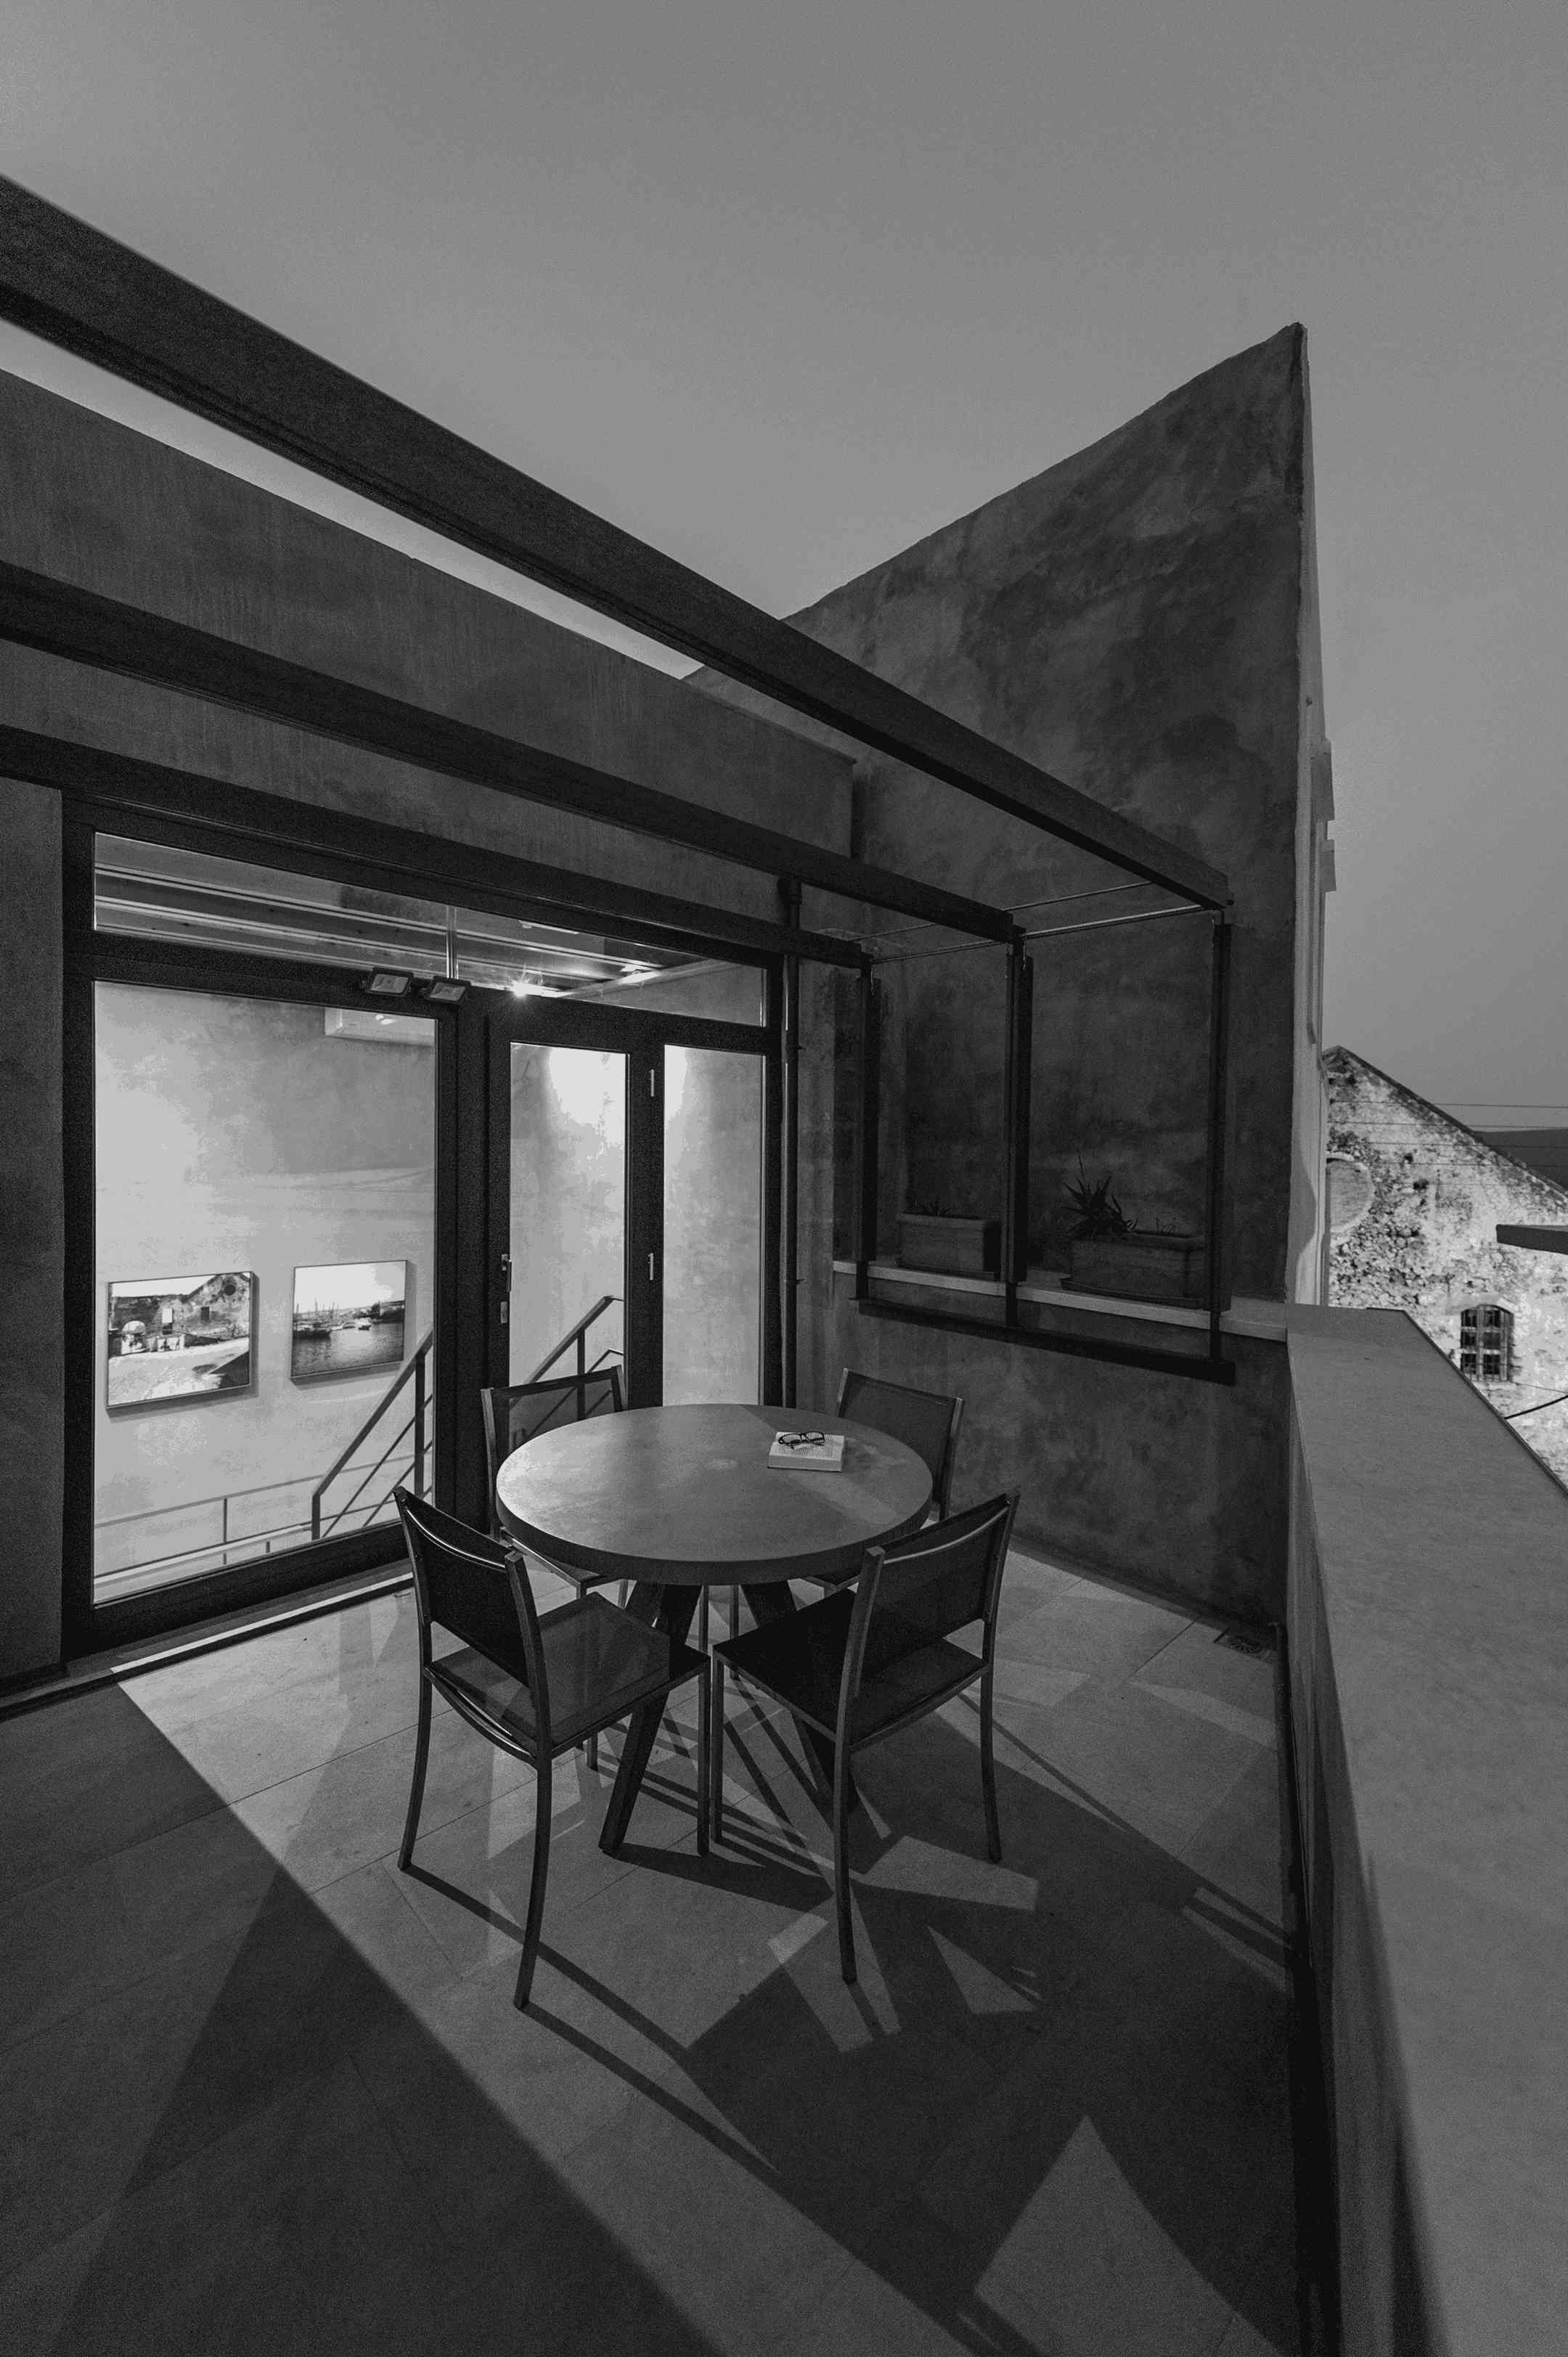 Rehabilitation of Two Buildings and Reuse as Two Small Houses by I.K. Verikakis Architectural Office No13 